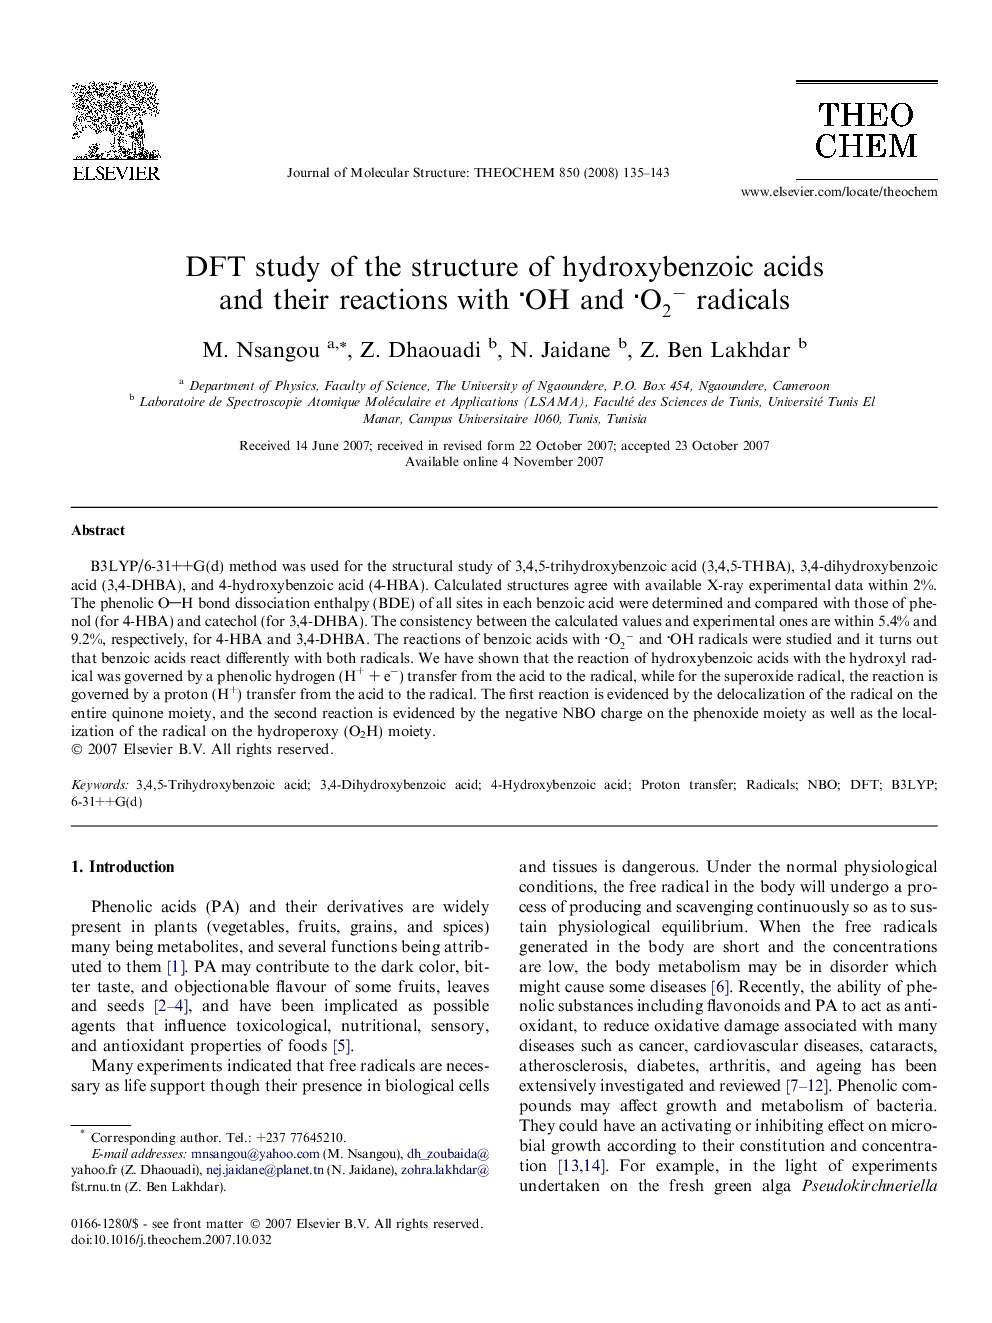 DFT study of the structure of hydroxybenzoic acids and their reactions with OH and O2- radicals